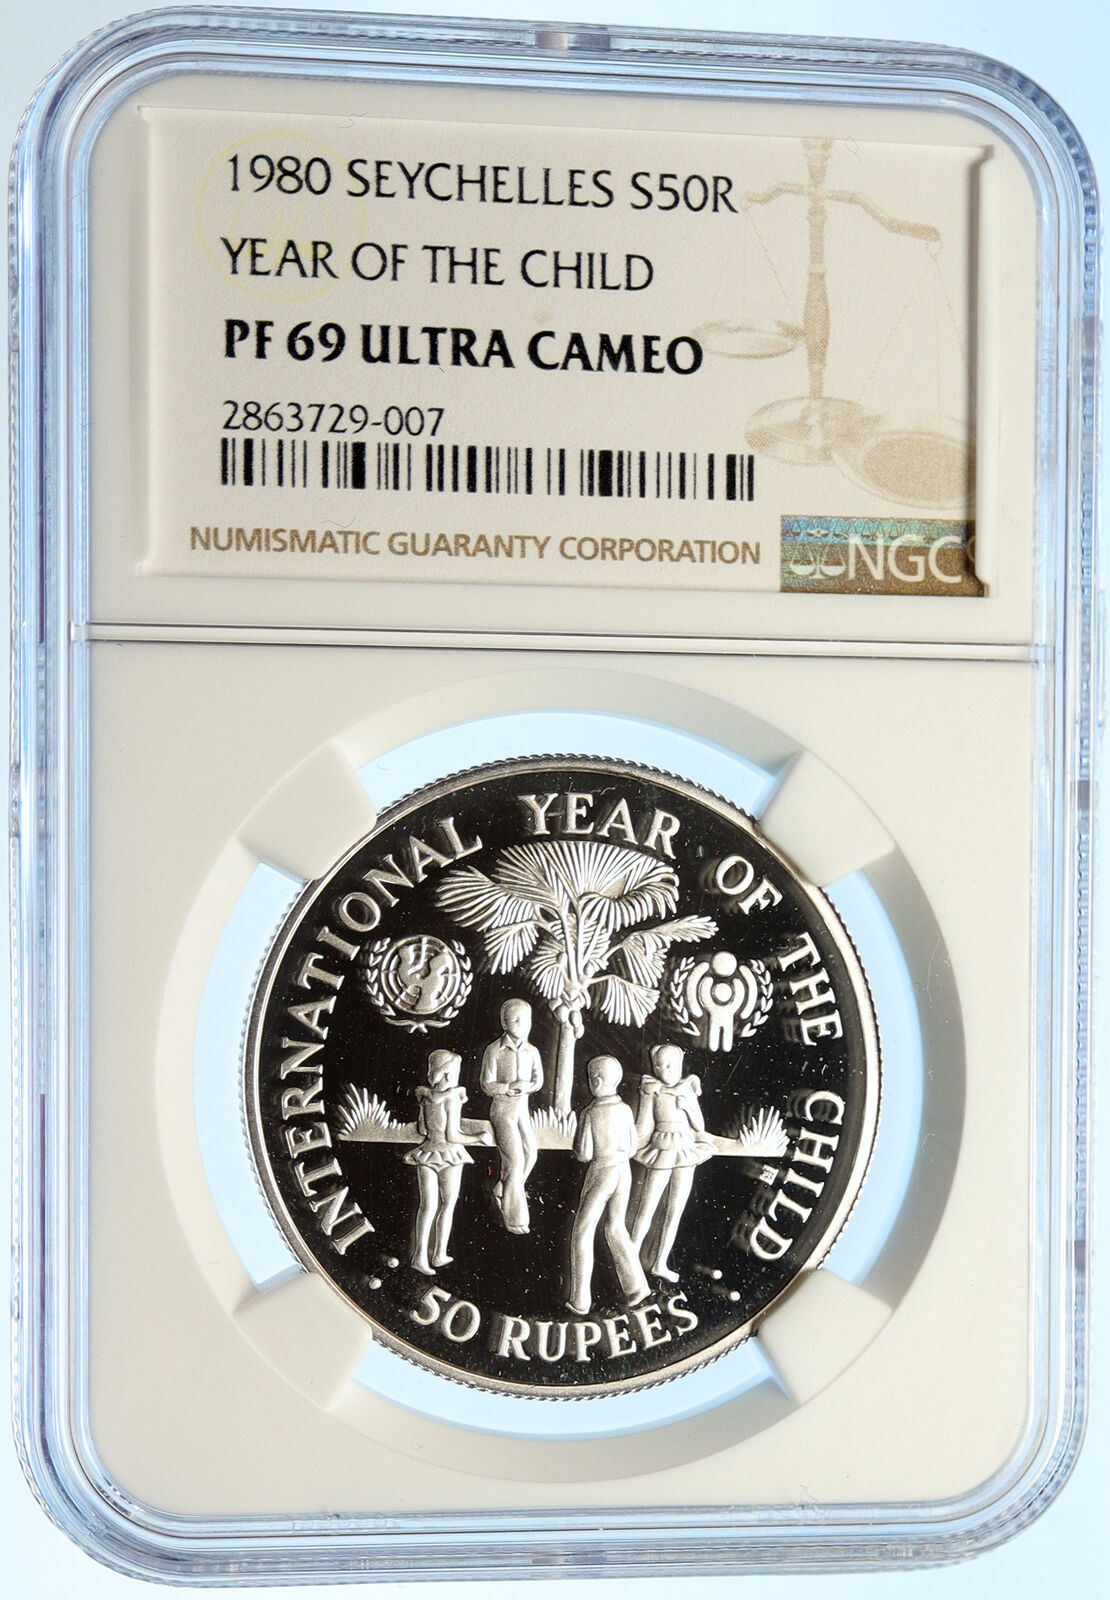 1980 SEYCHELLES UK Year of the CHILD Old Proof Silver 50 Rupees Coin NGC i99386